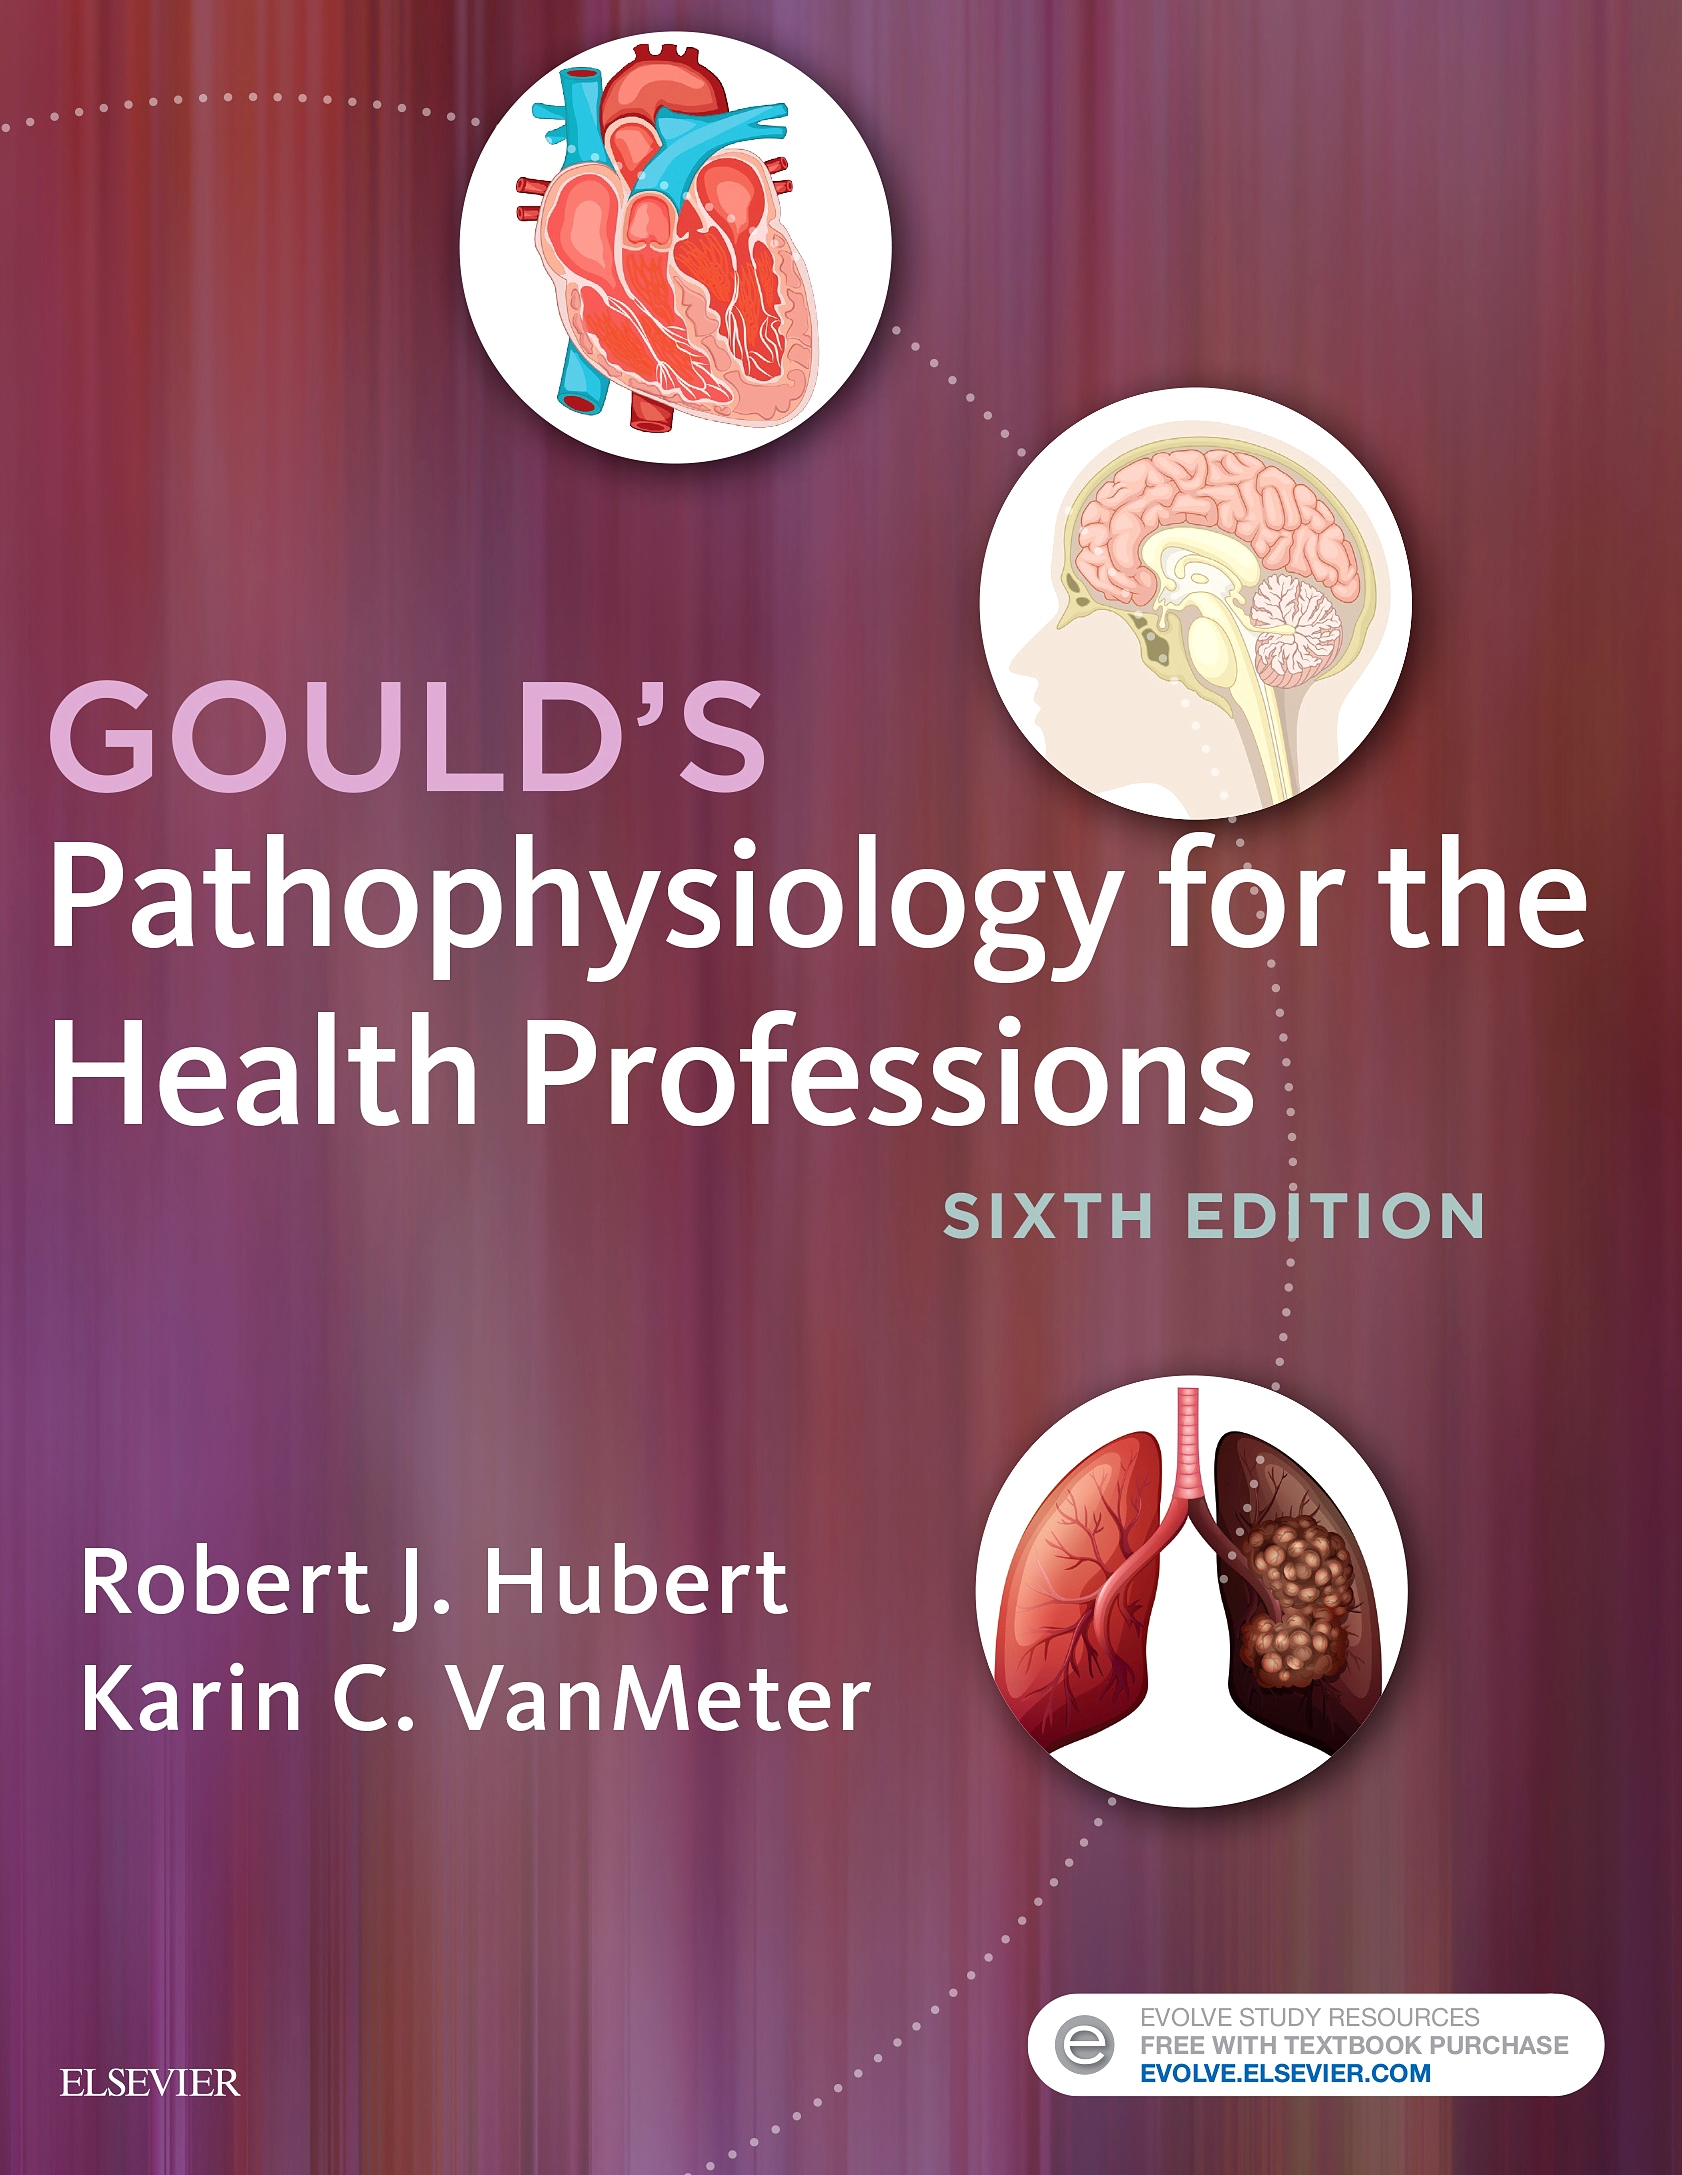 Evolve Resources for Gould's Pathophysiology for the Health Professions, 6th Edition